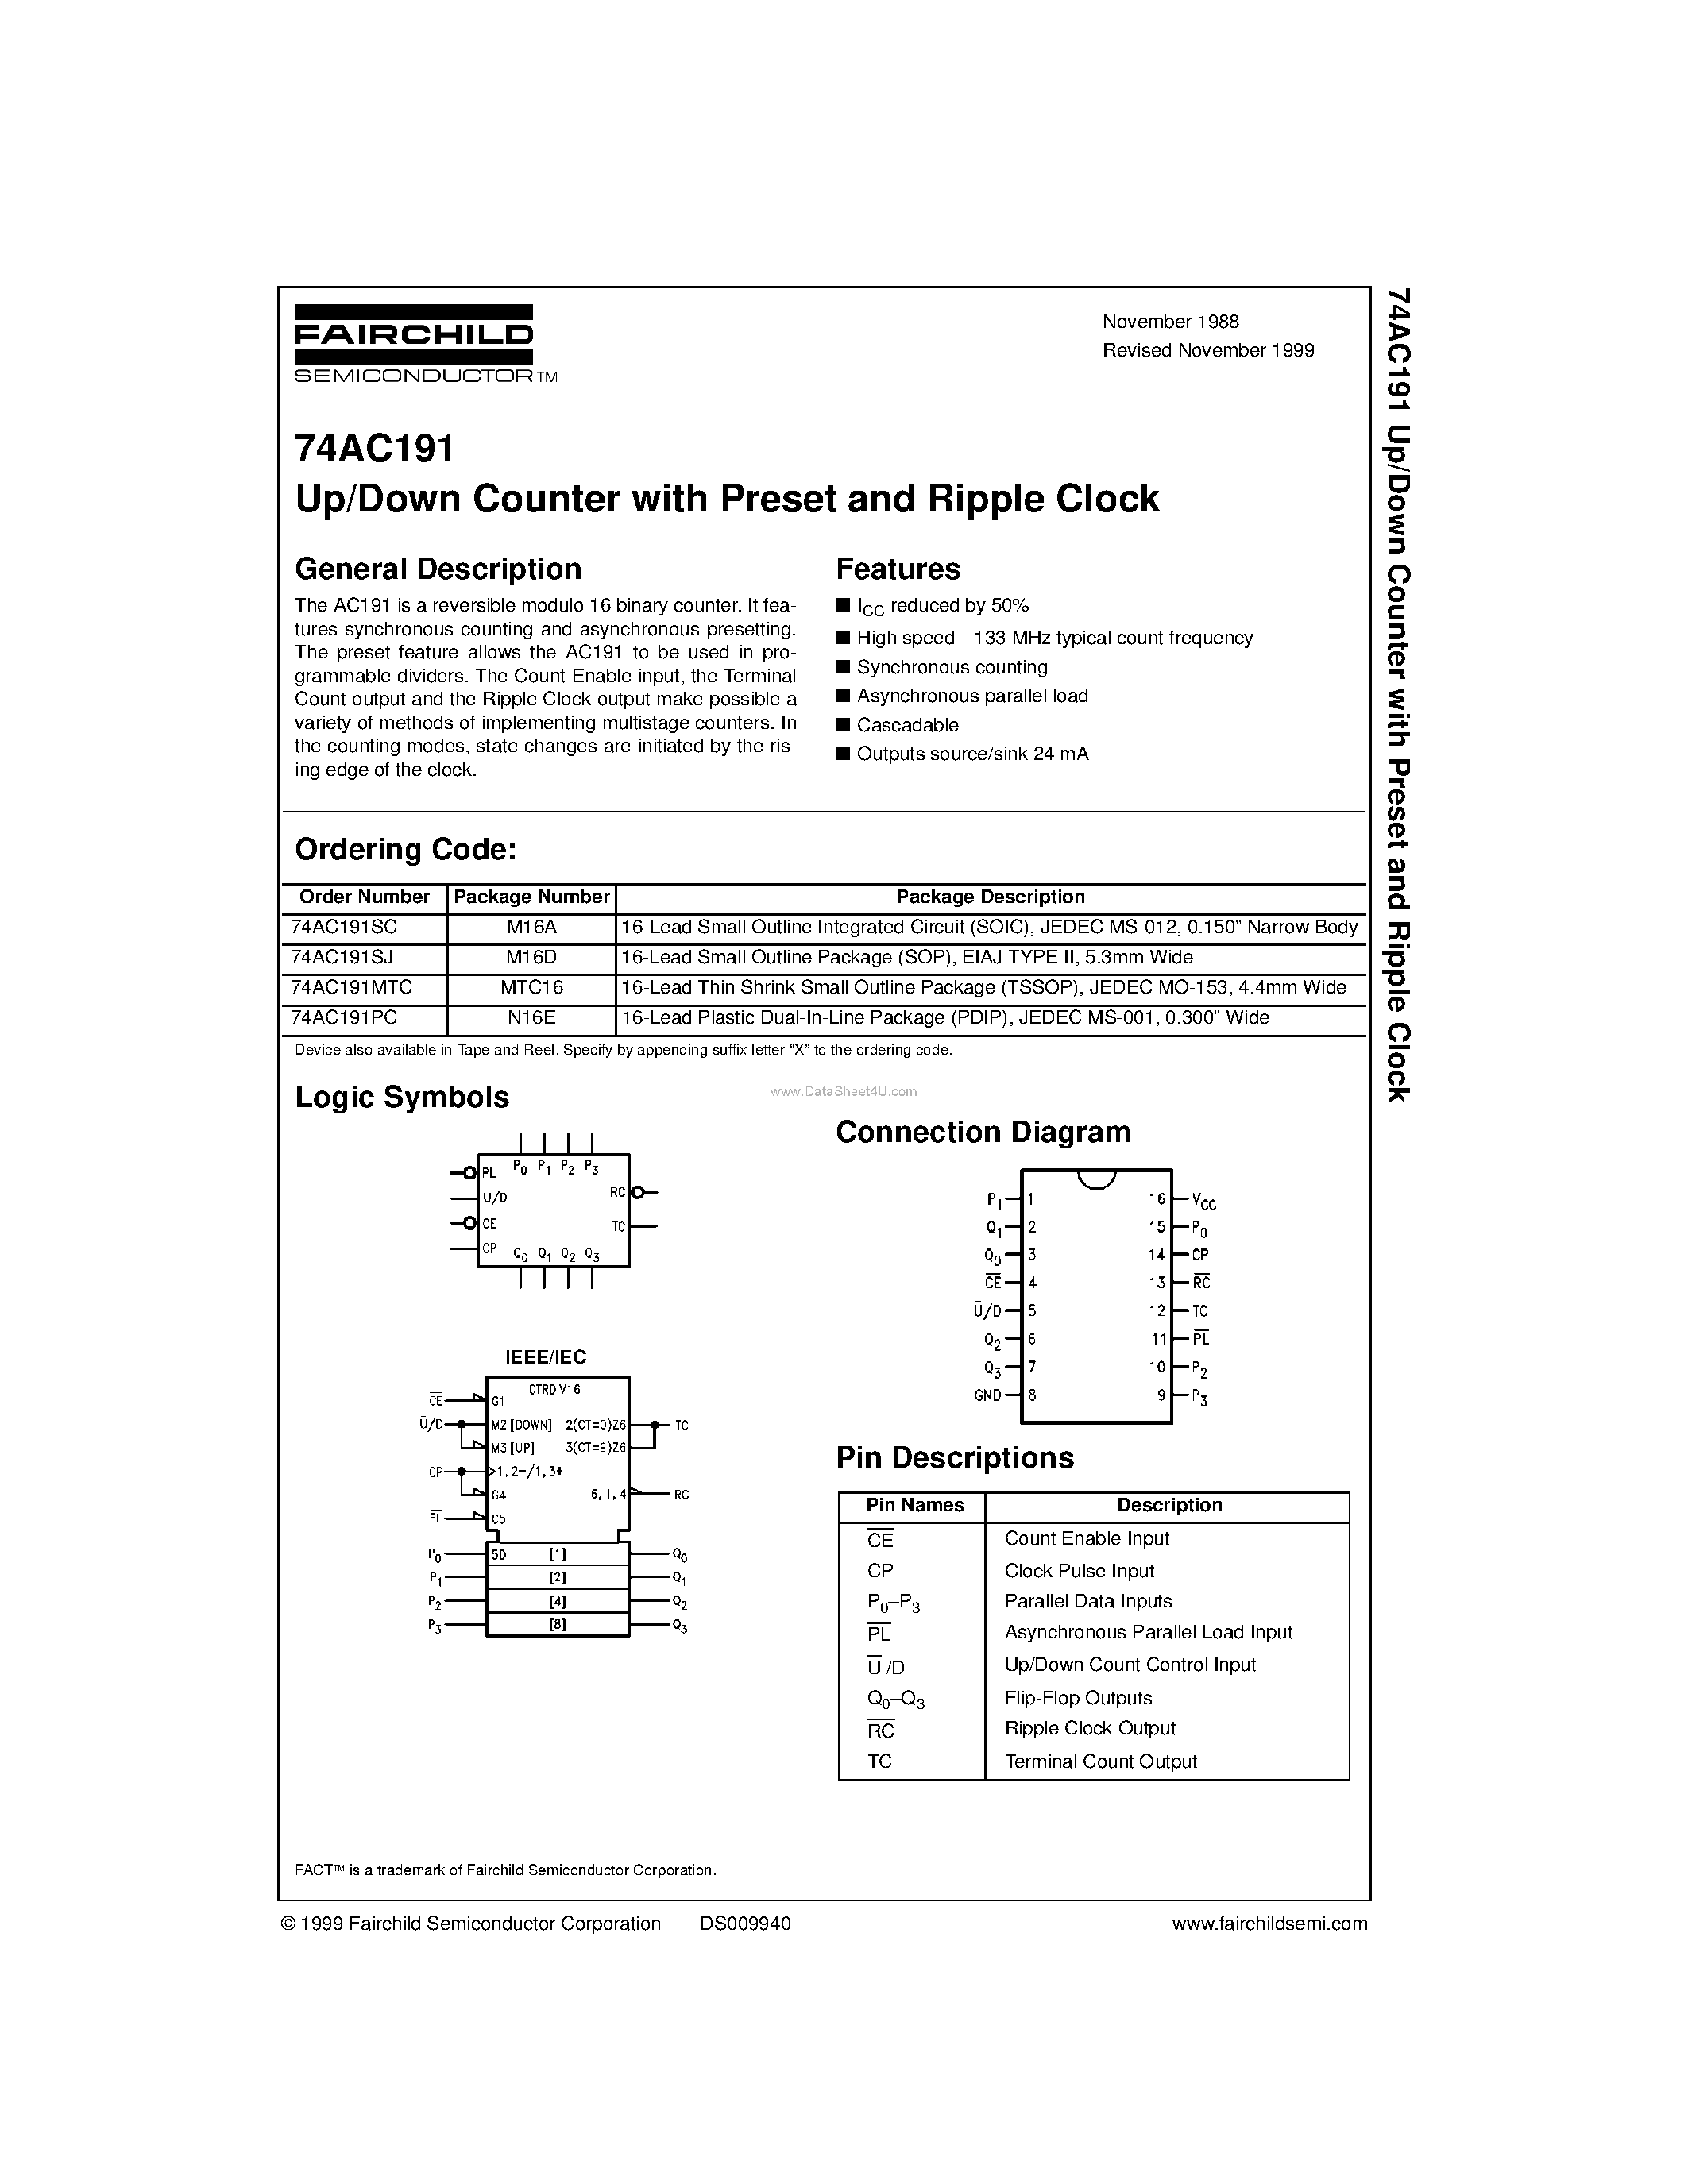 Datasheet 74AC191SC - Up/Down Counter with Preset and Ripple Clock page 1